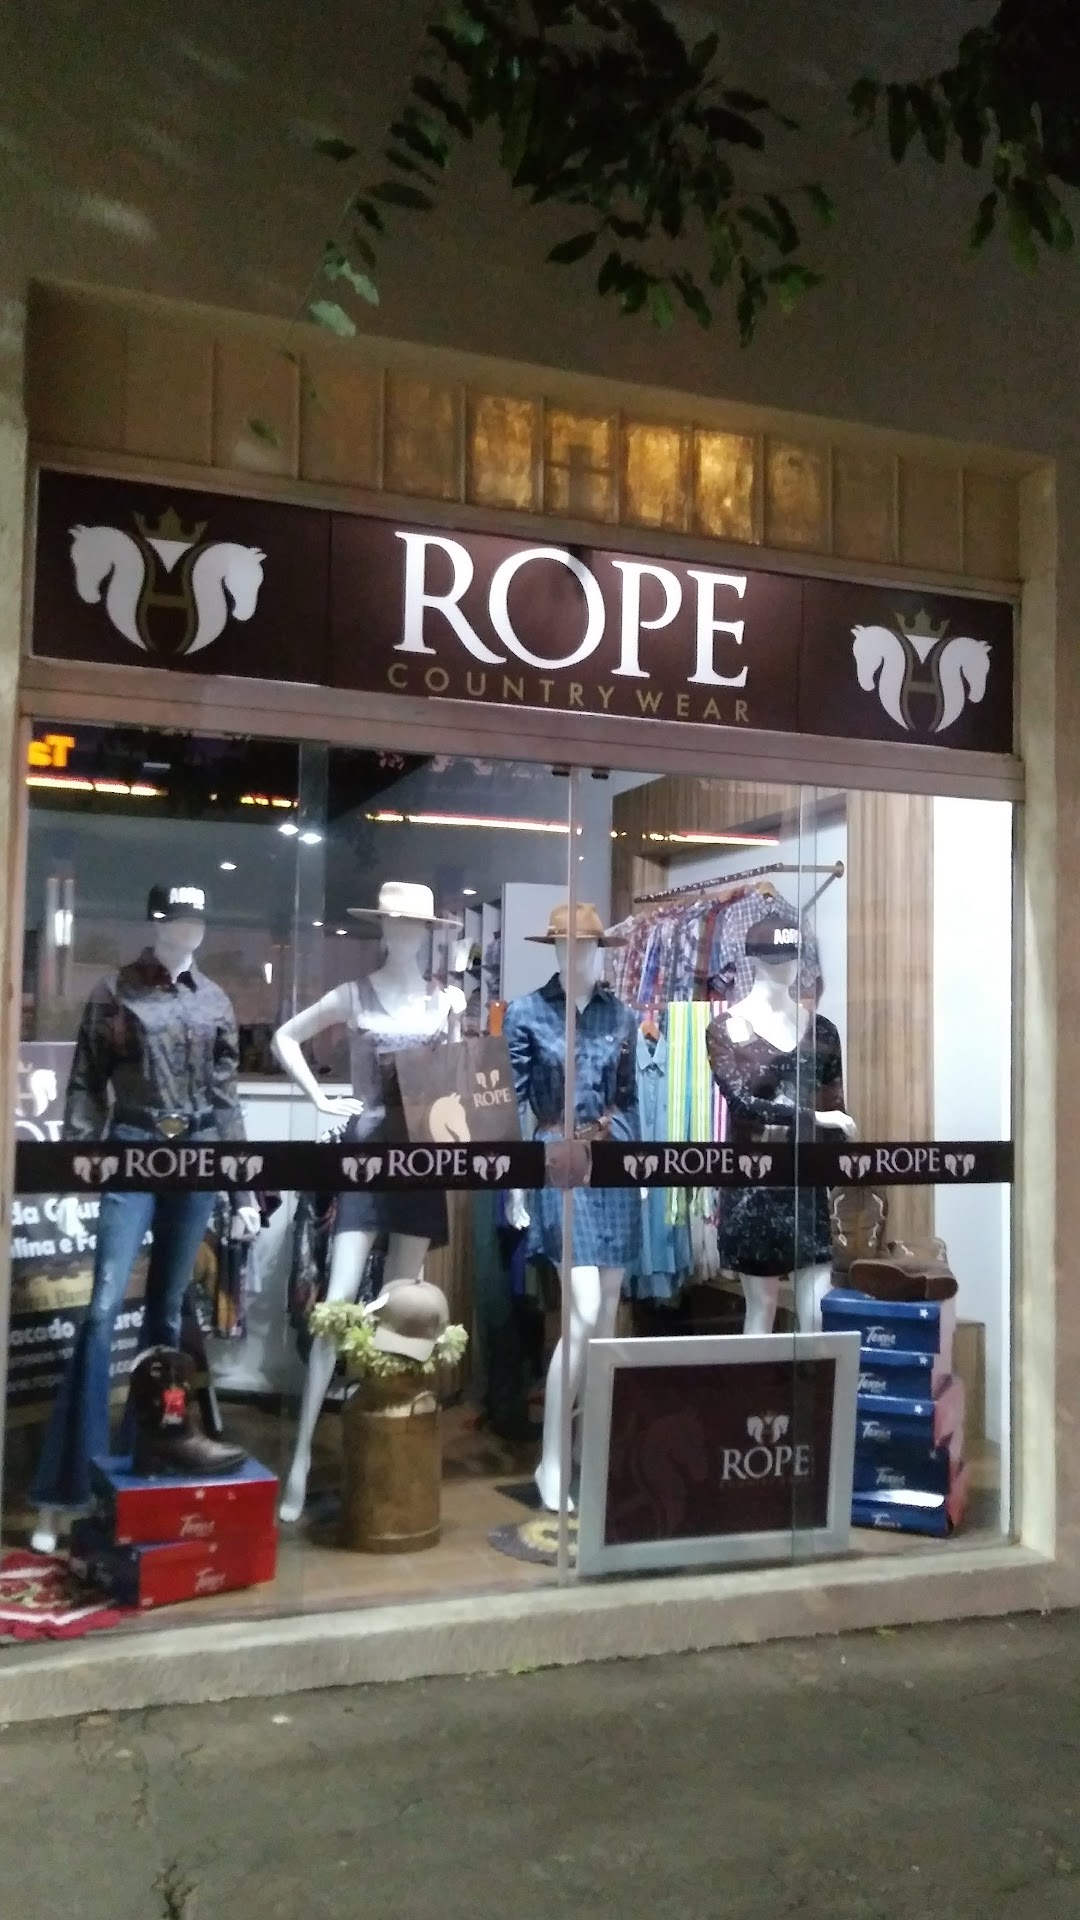 Rope Country Wear